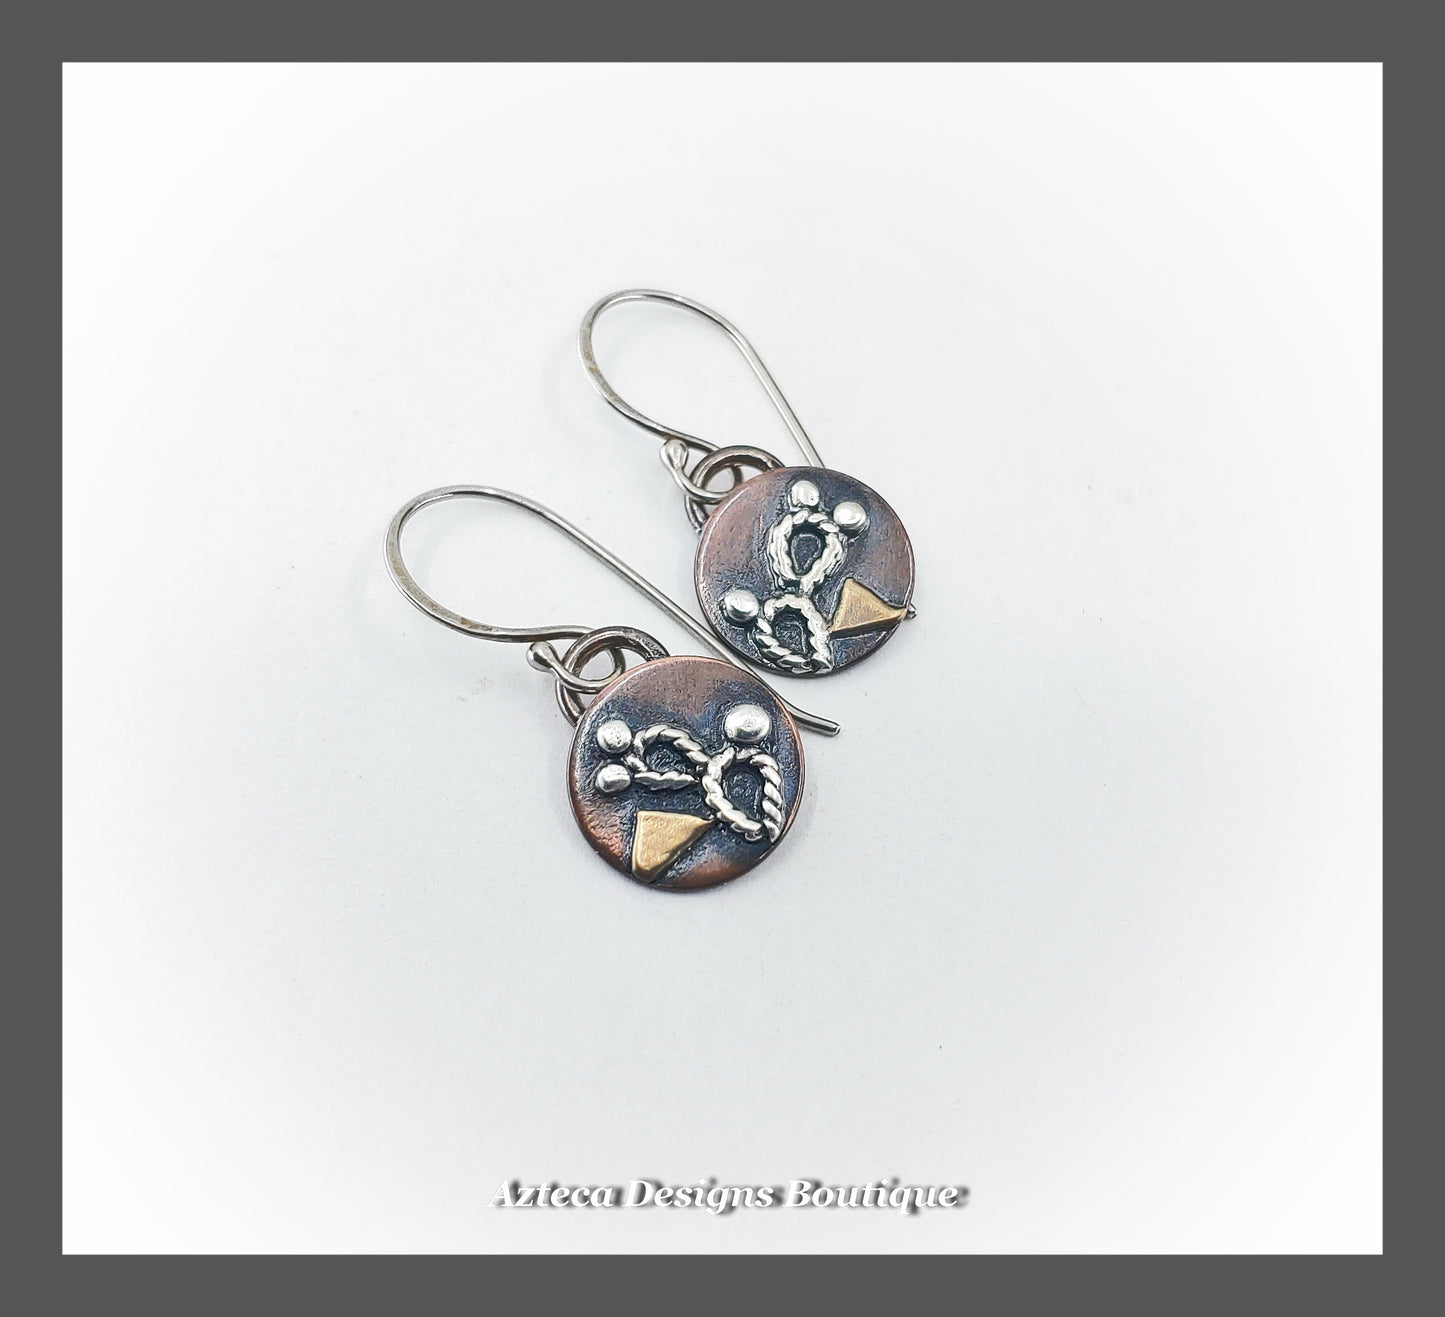 Miniature Prickly Pear Cacti Earrings + Hand Fabricated Copper Argentium Silver